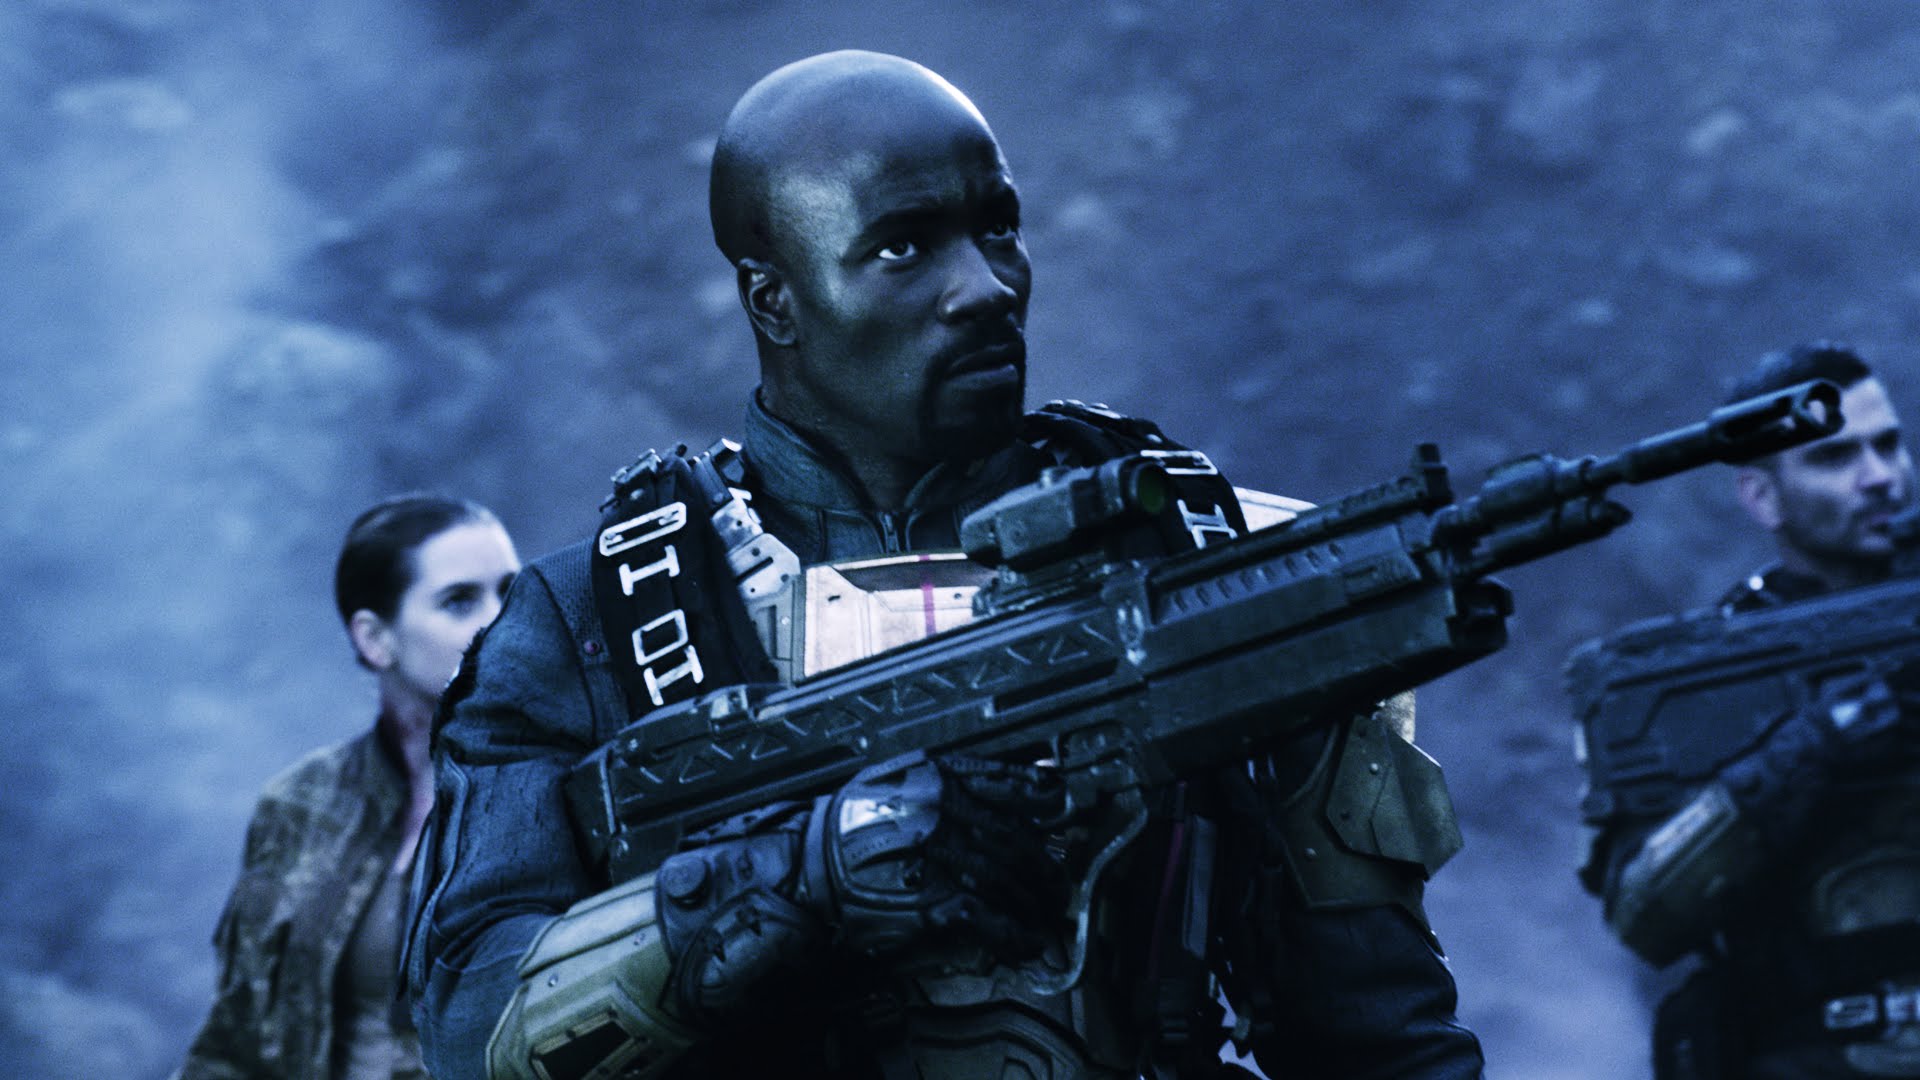 Video For SDCC 14: 343 Industries and Scott Free Productions Offer First-Look of Halo: Nightfall